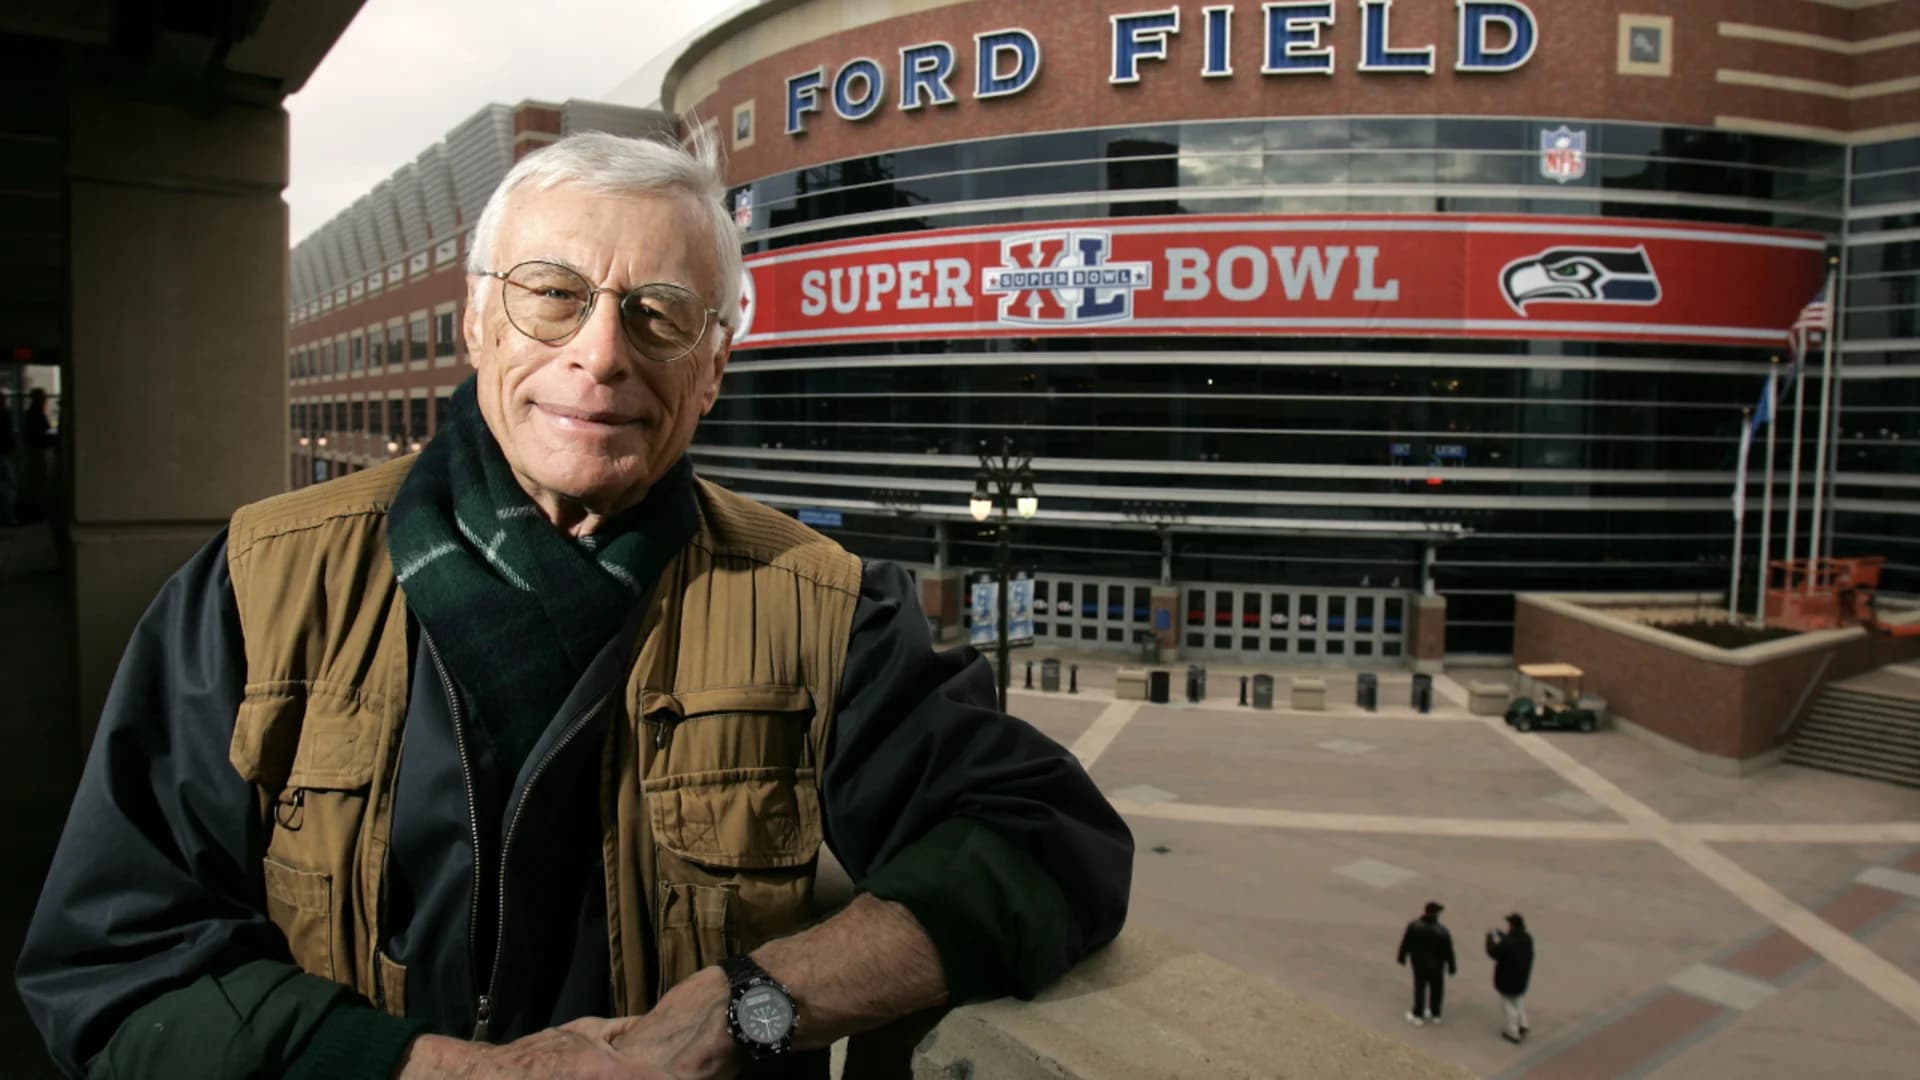 Long Island native, football writer Jerry Green missing first Super Bowl in 57 years